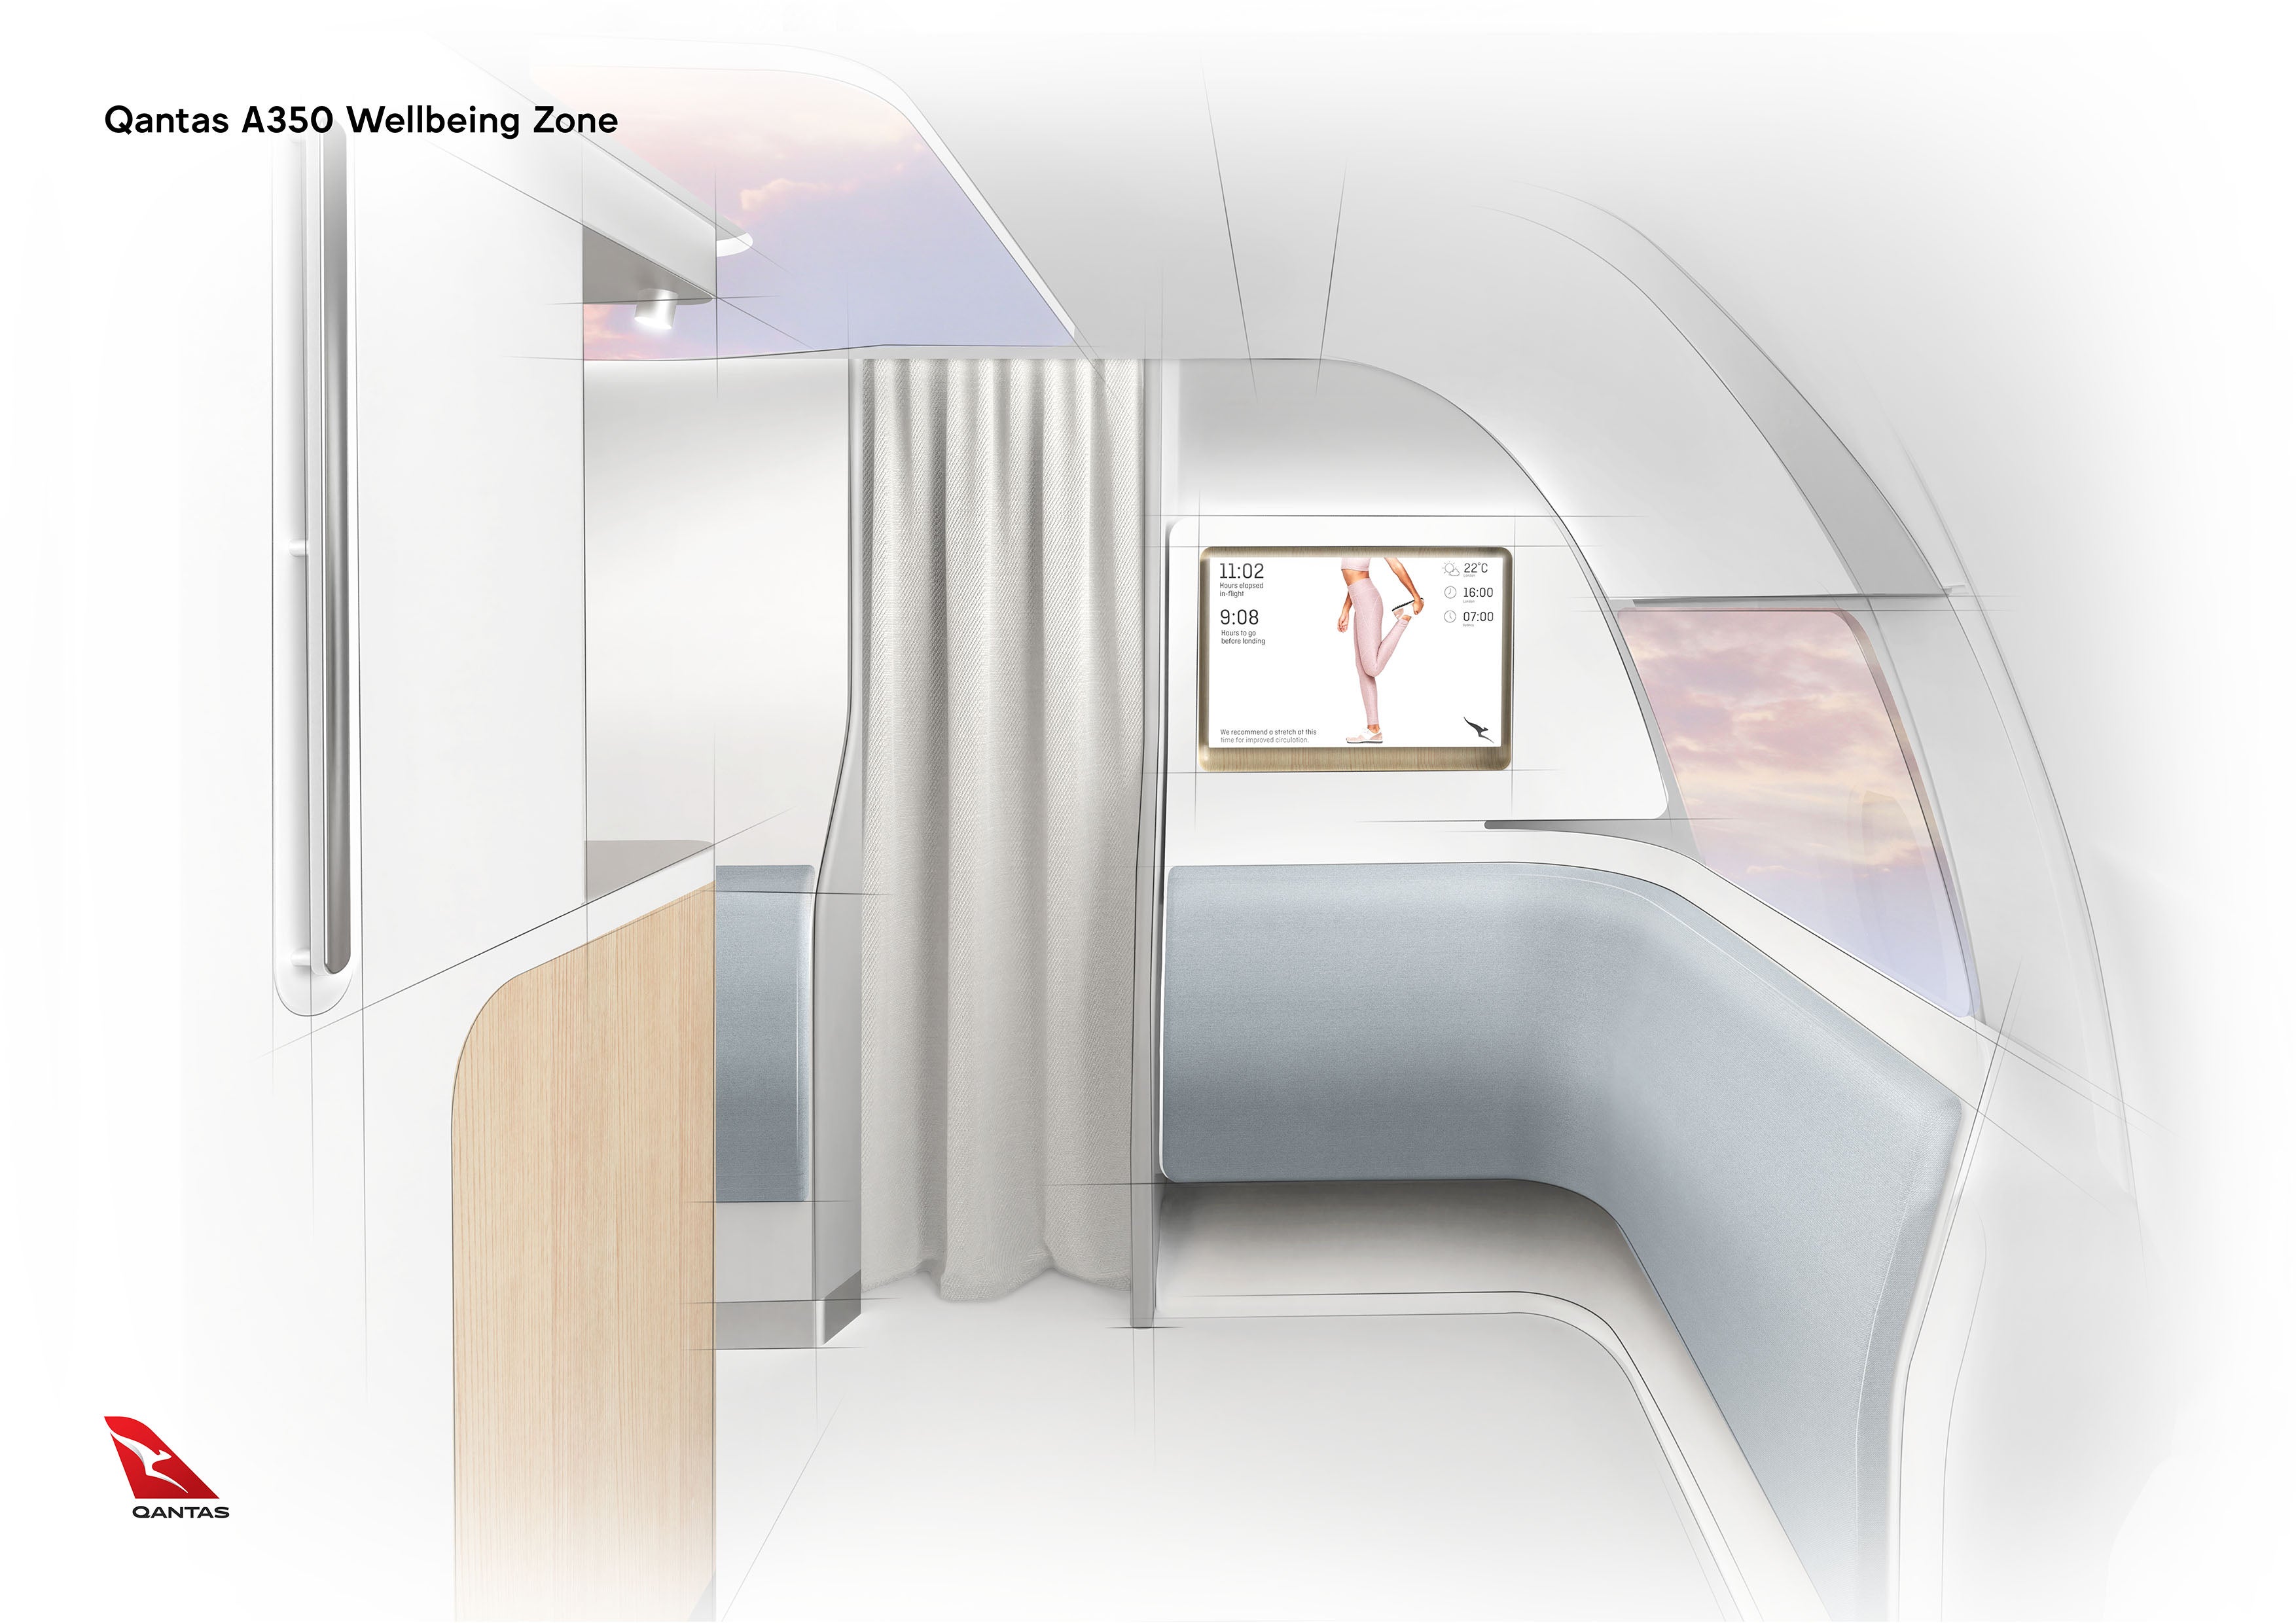 More than 40 per cent of the cabin will be dedicated to premium seating, and there will be a ‘Wellbeing Zone’